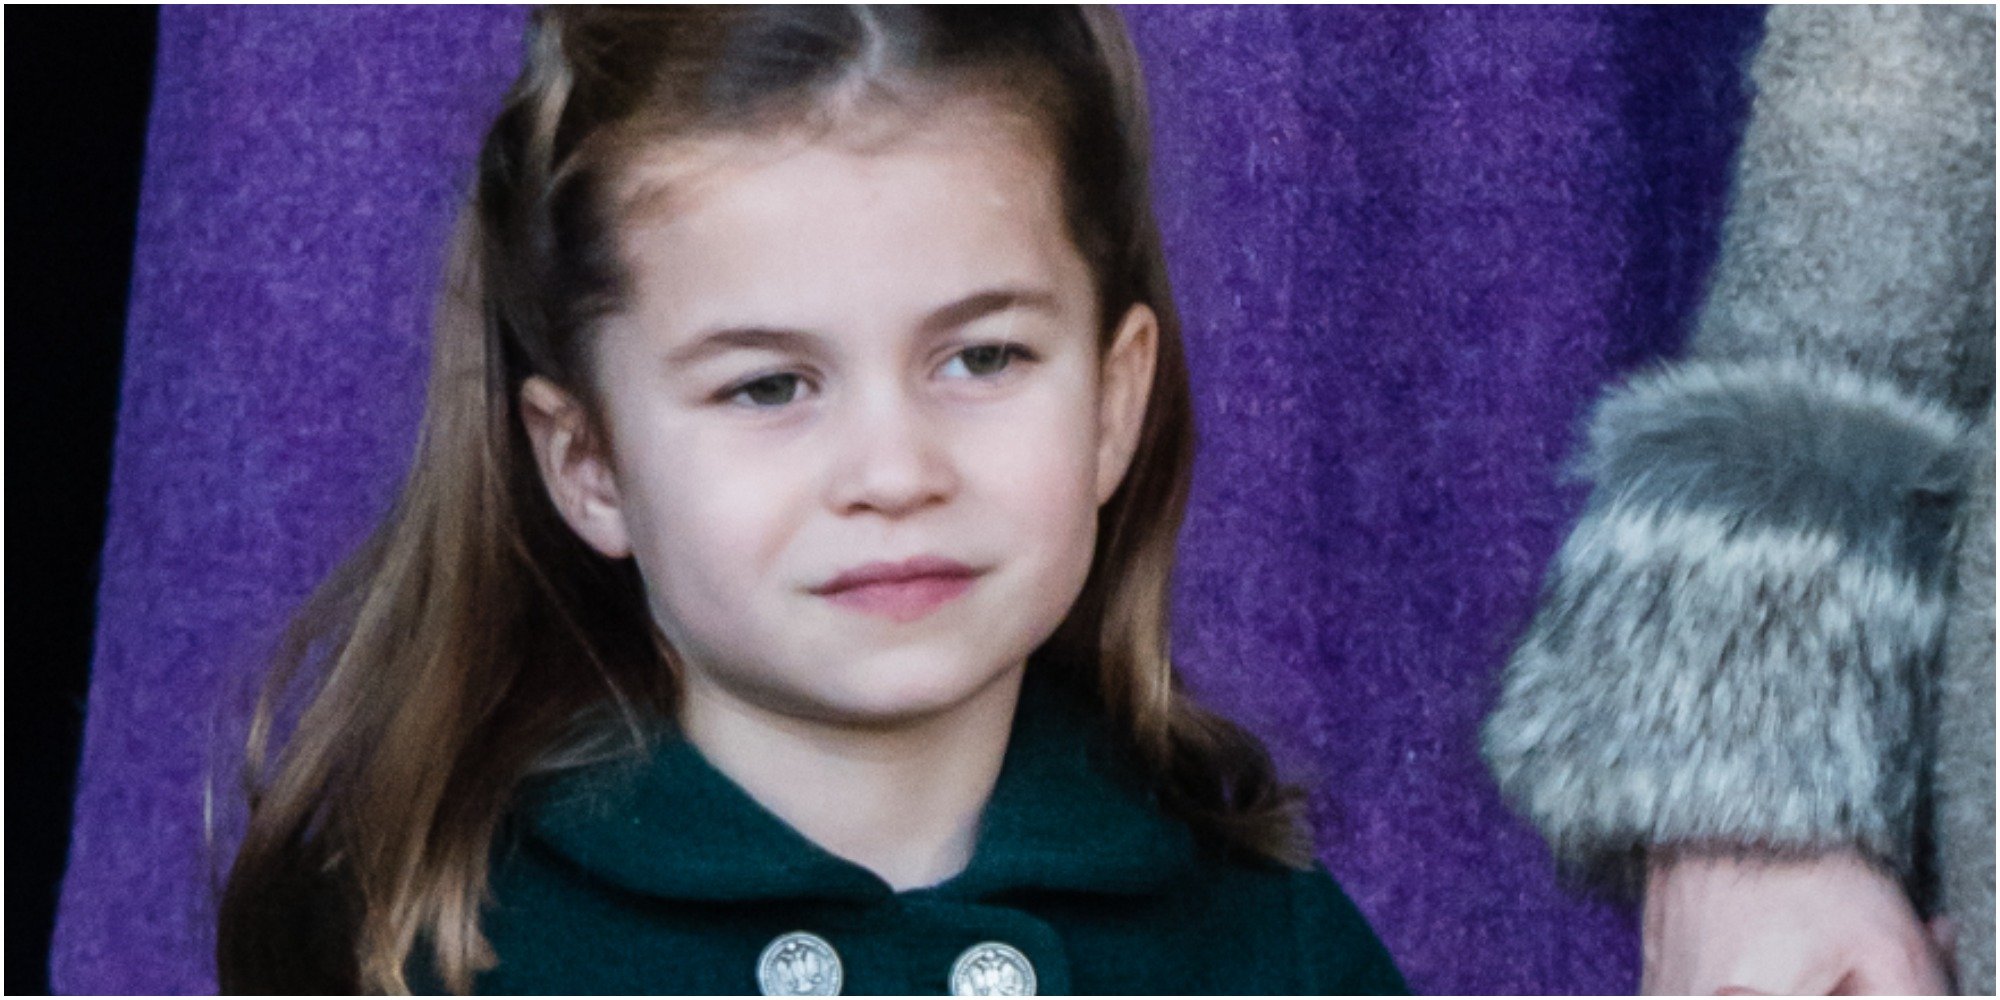 Princess Charlotte wears a green coat in a close up photo.